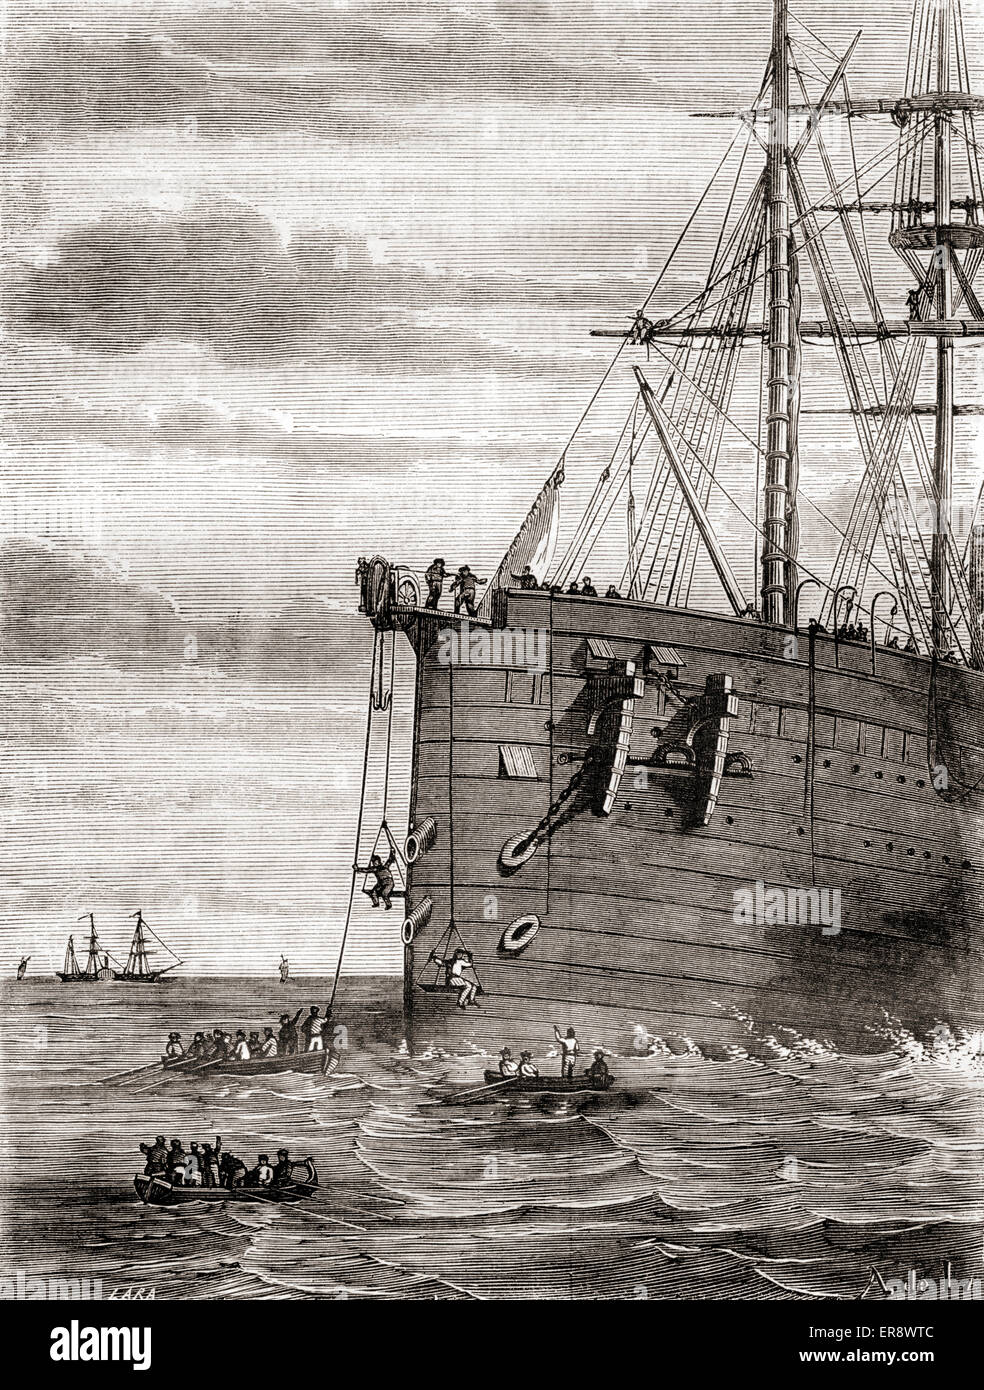 The S.S. Great Eastern raising the previously lost transatlantic telegraph cable in 1865. Stock Photo